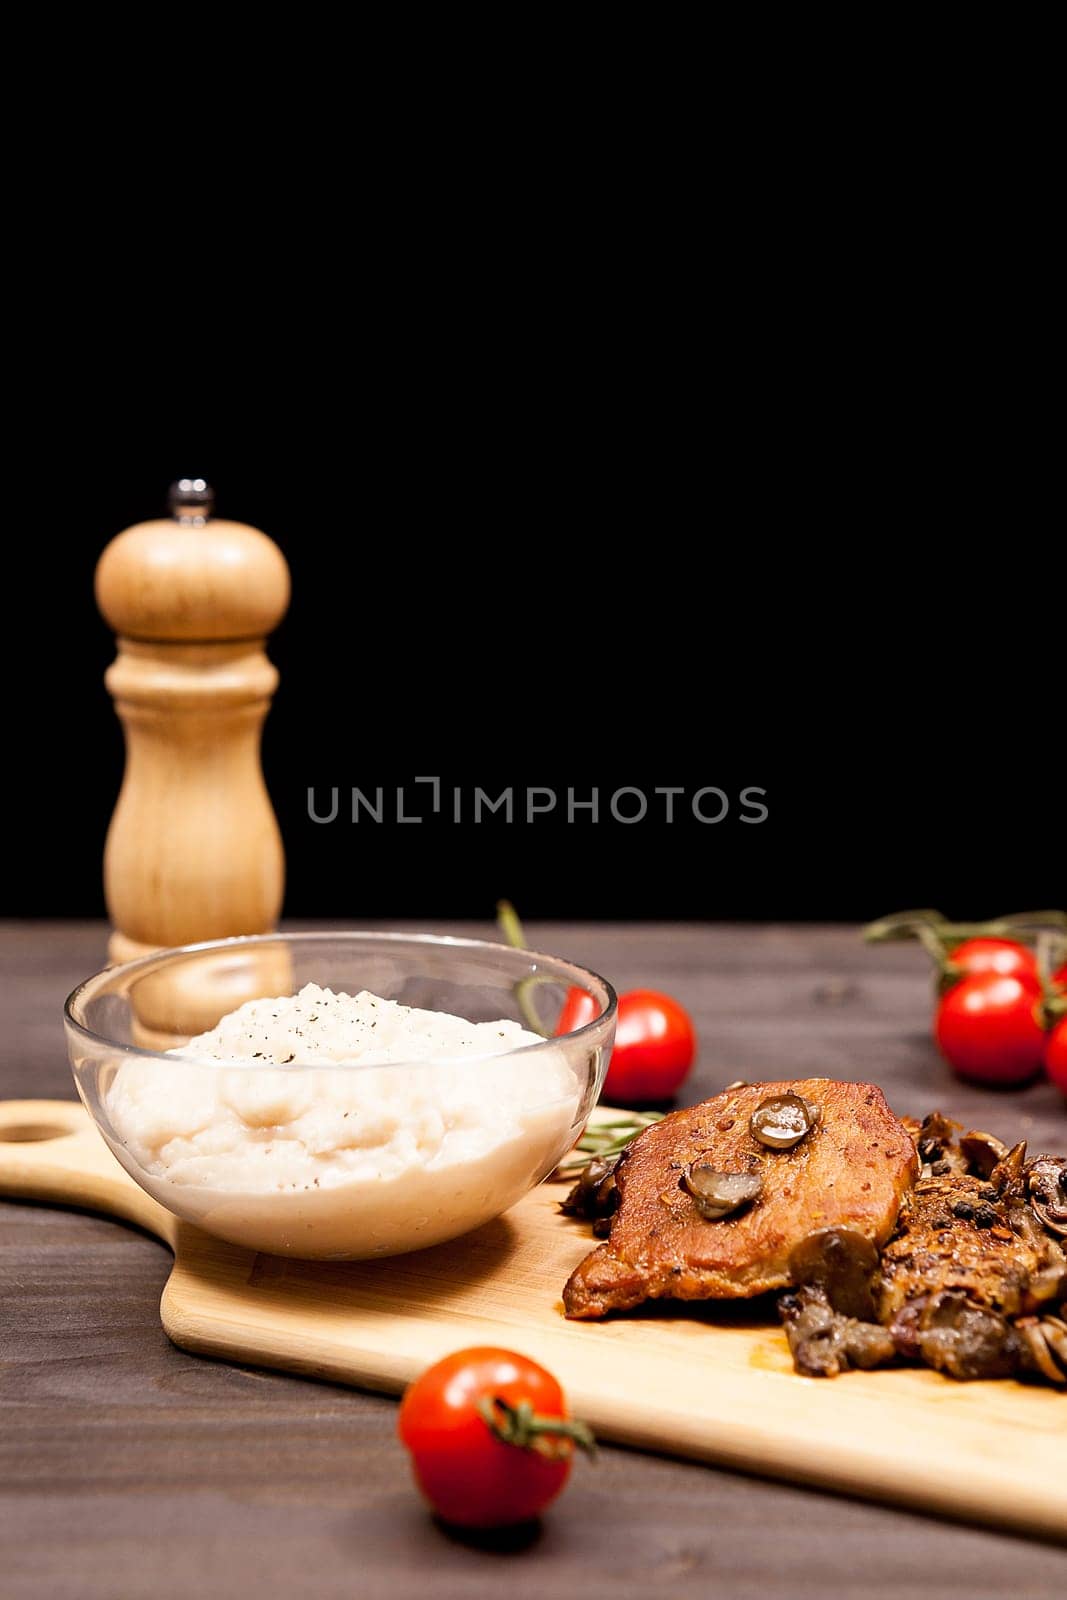 Grilled pork steak, mushrooms cherry tomatoes and a plate with bean paste on wooden plate on a table in studio photo on black background